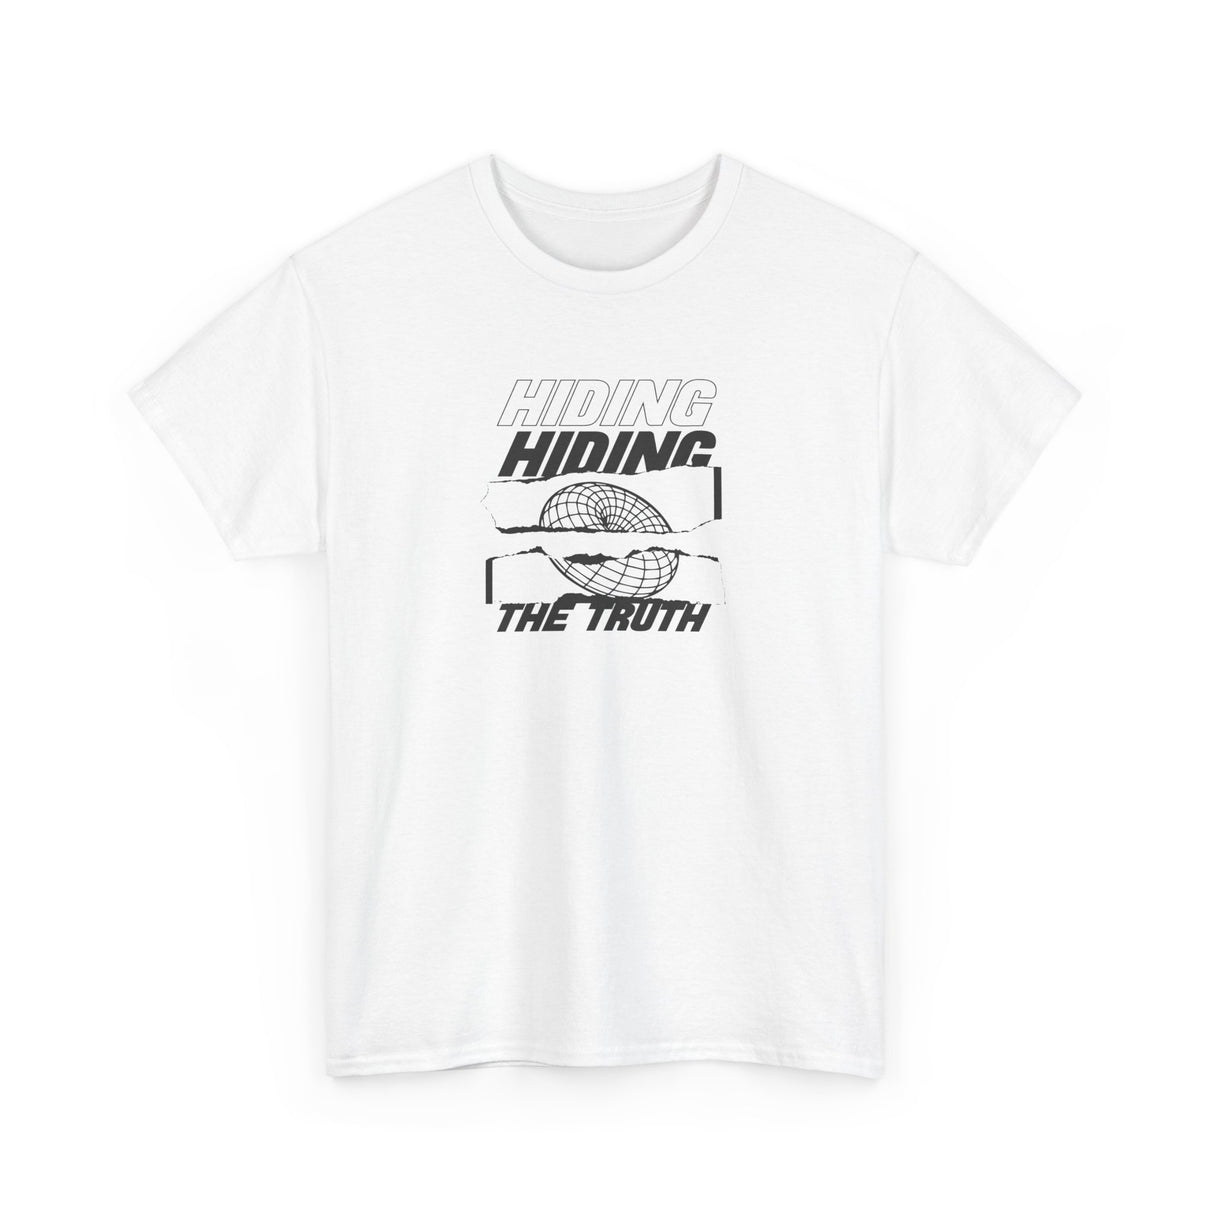 Hiding The Truth Graphic Tee Shirt